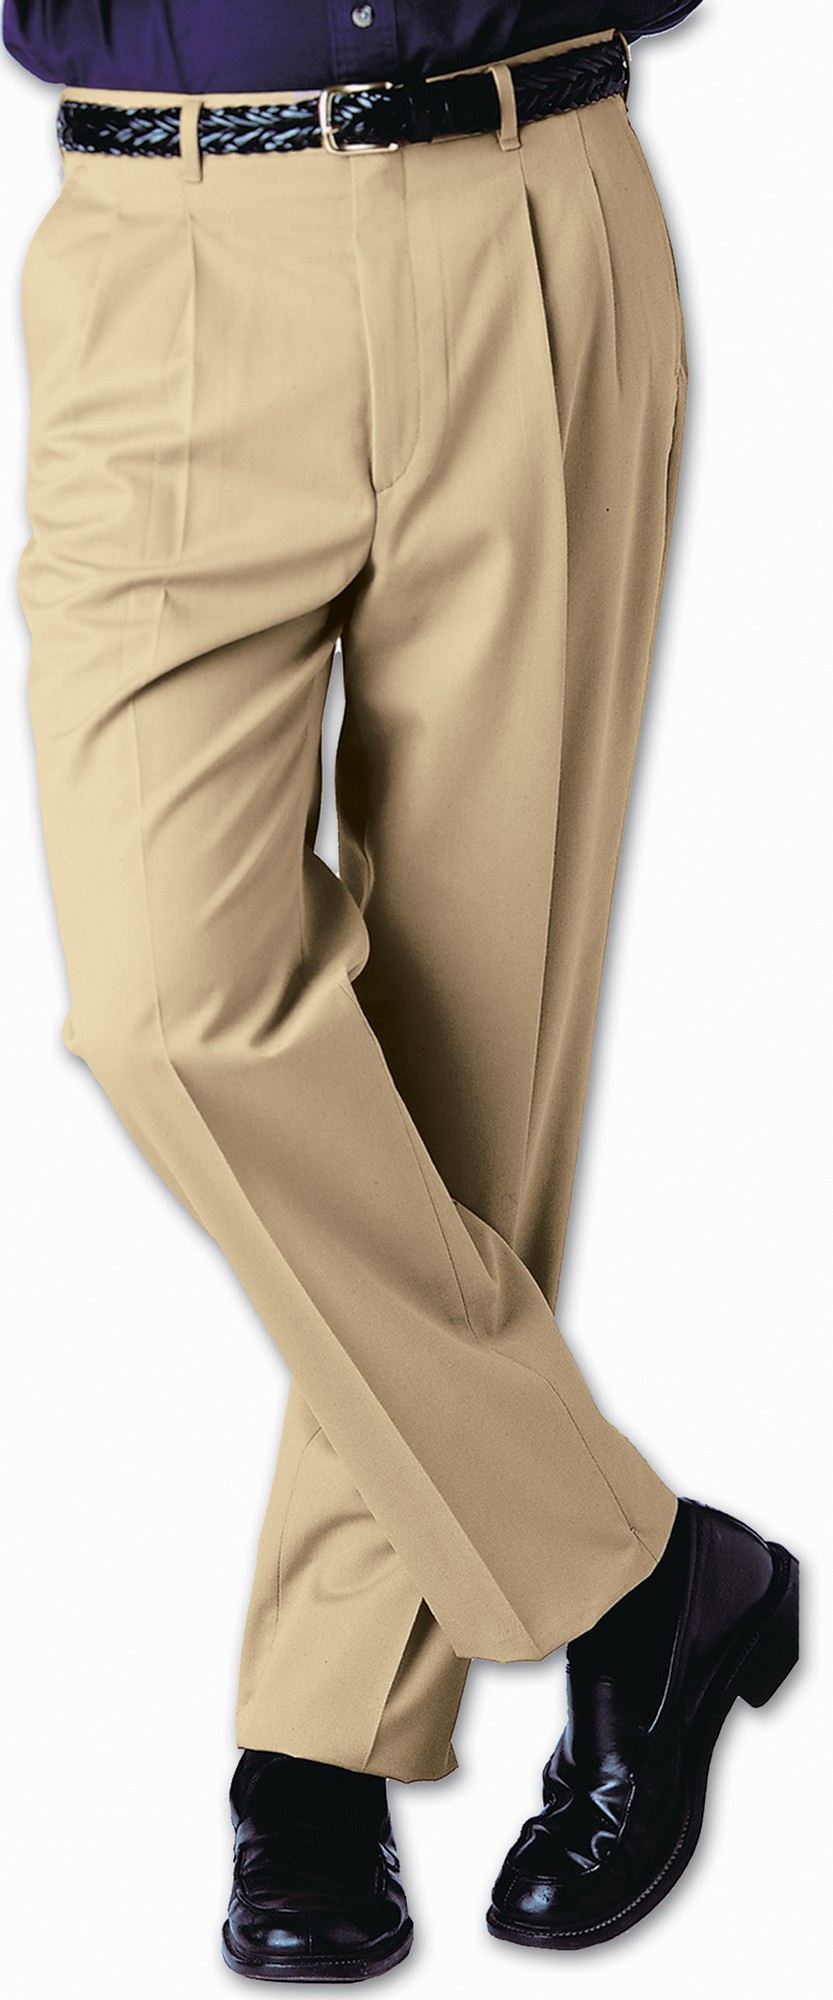 Edwards Men's Business Casual Pleated Pant -Online Exclusive